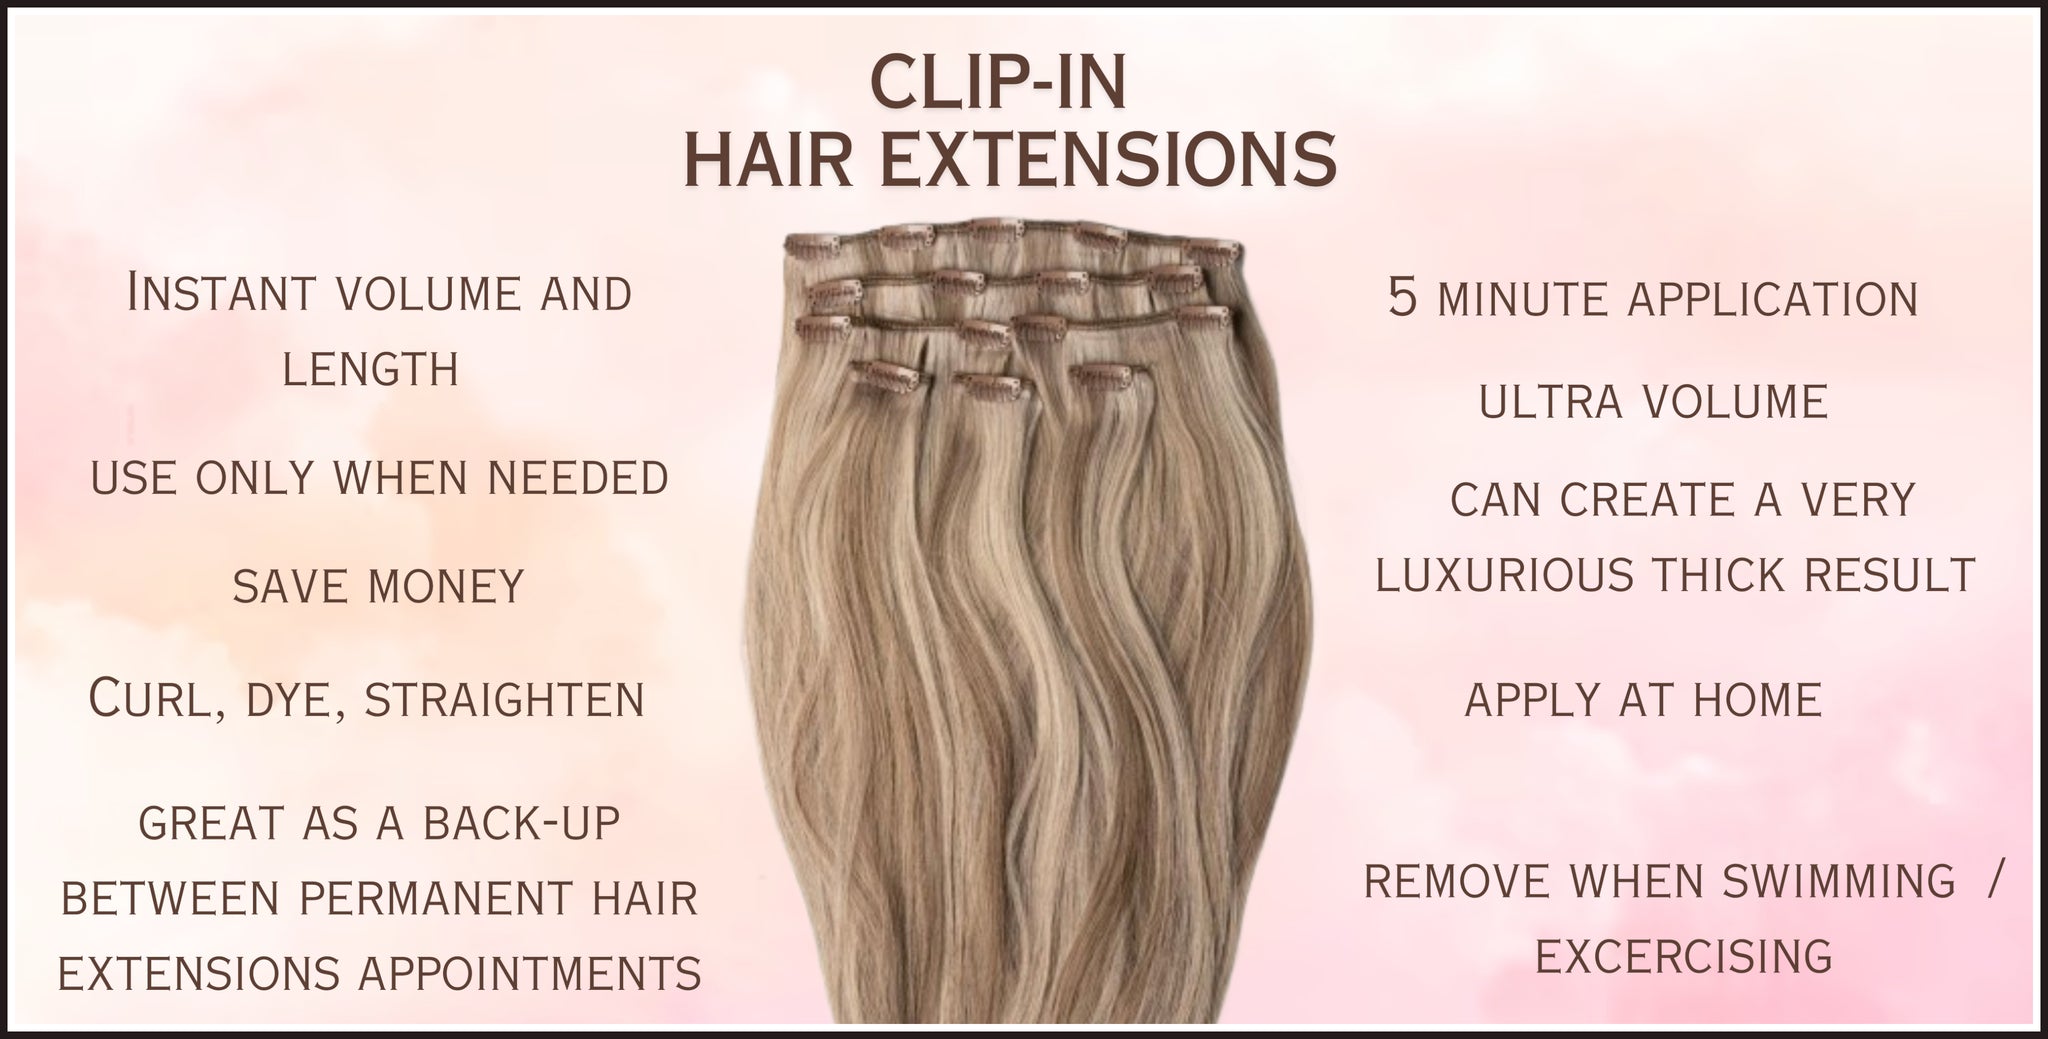 The benefits of using clip in hair extensions